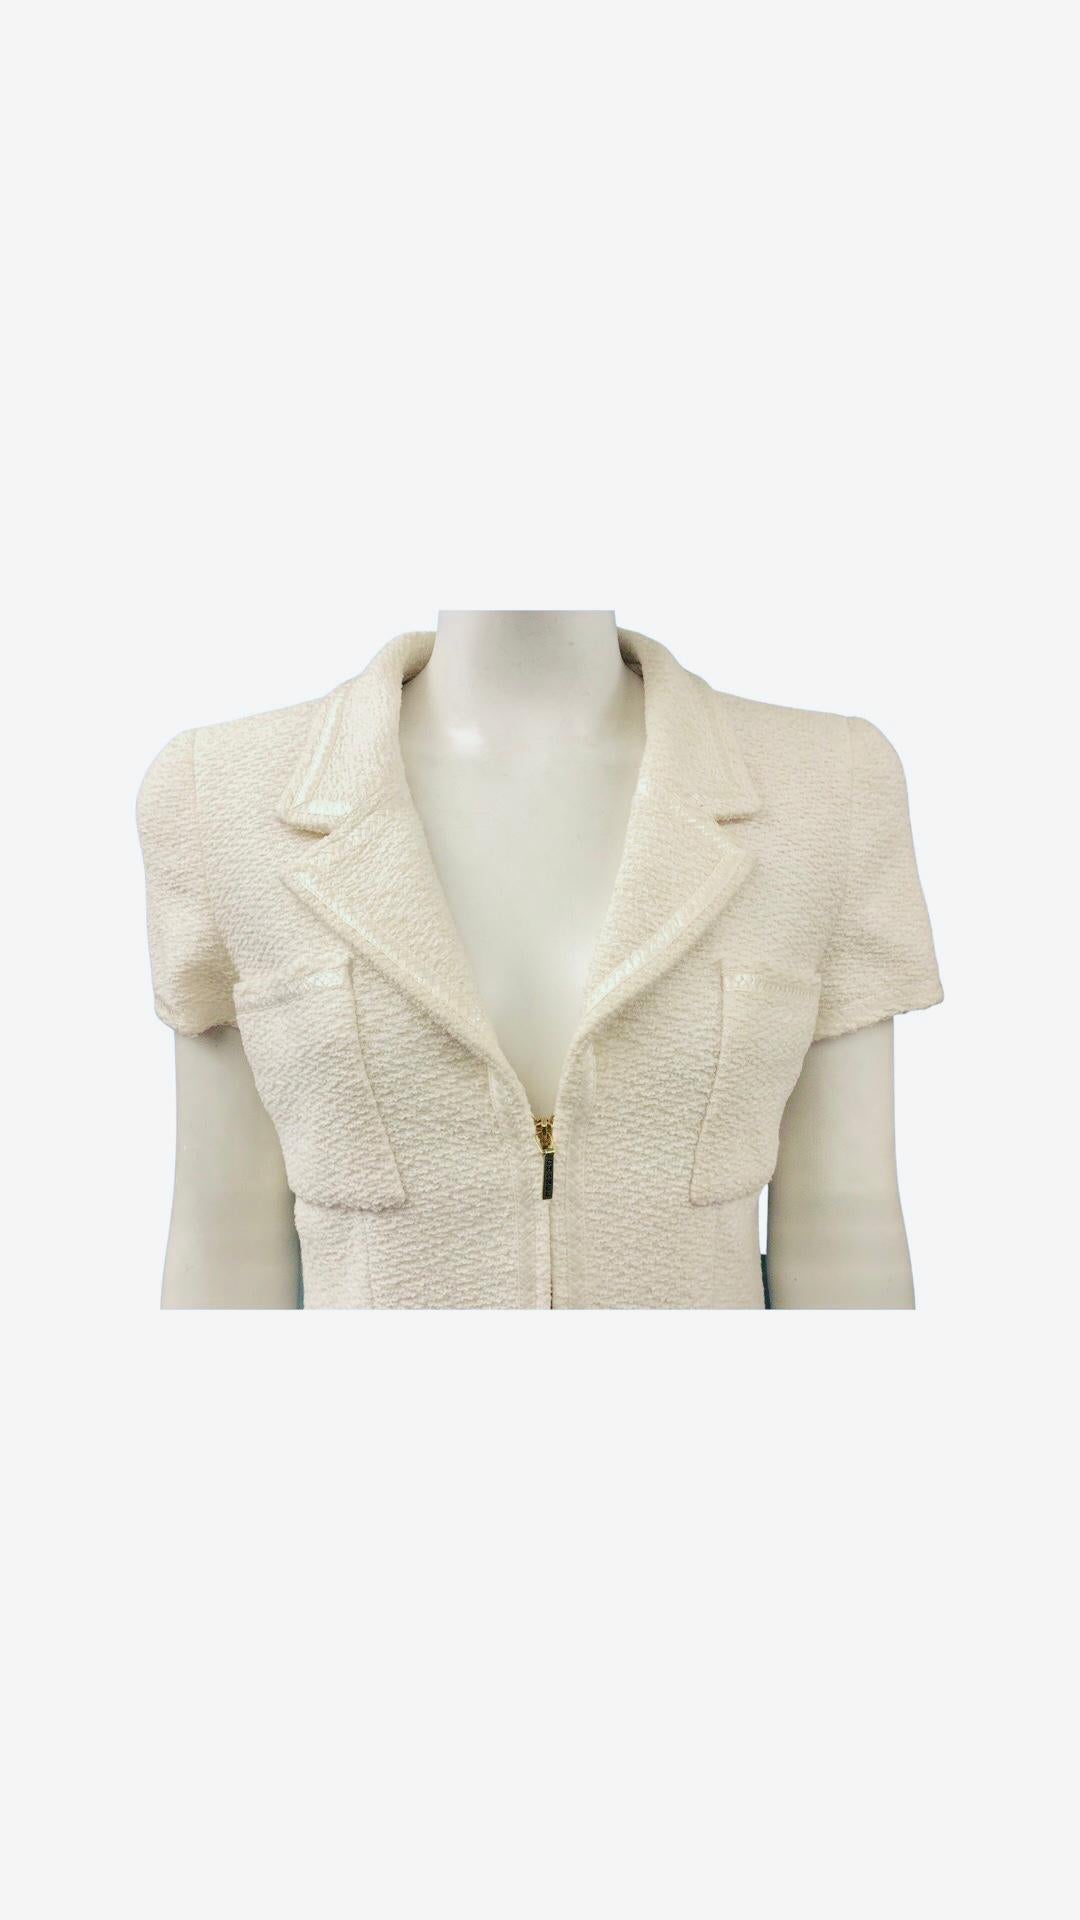 Chanel 1995 White Tweed Short Sleeves Jacket For Sale 1